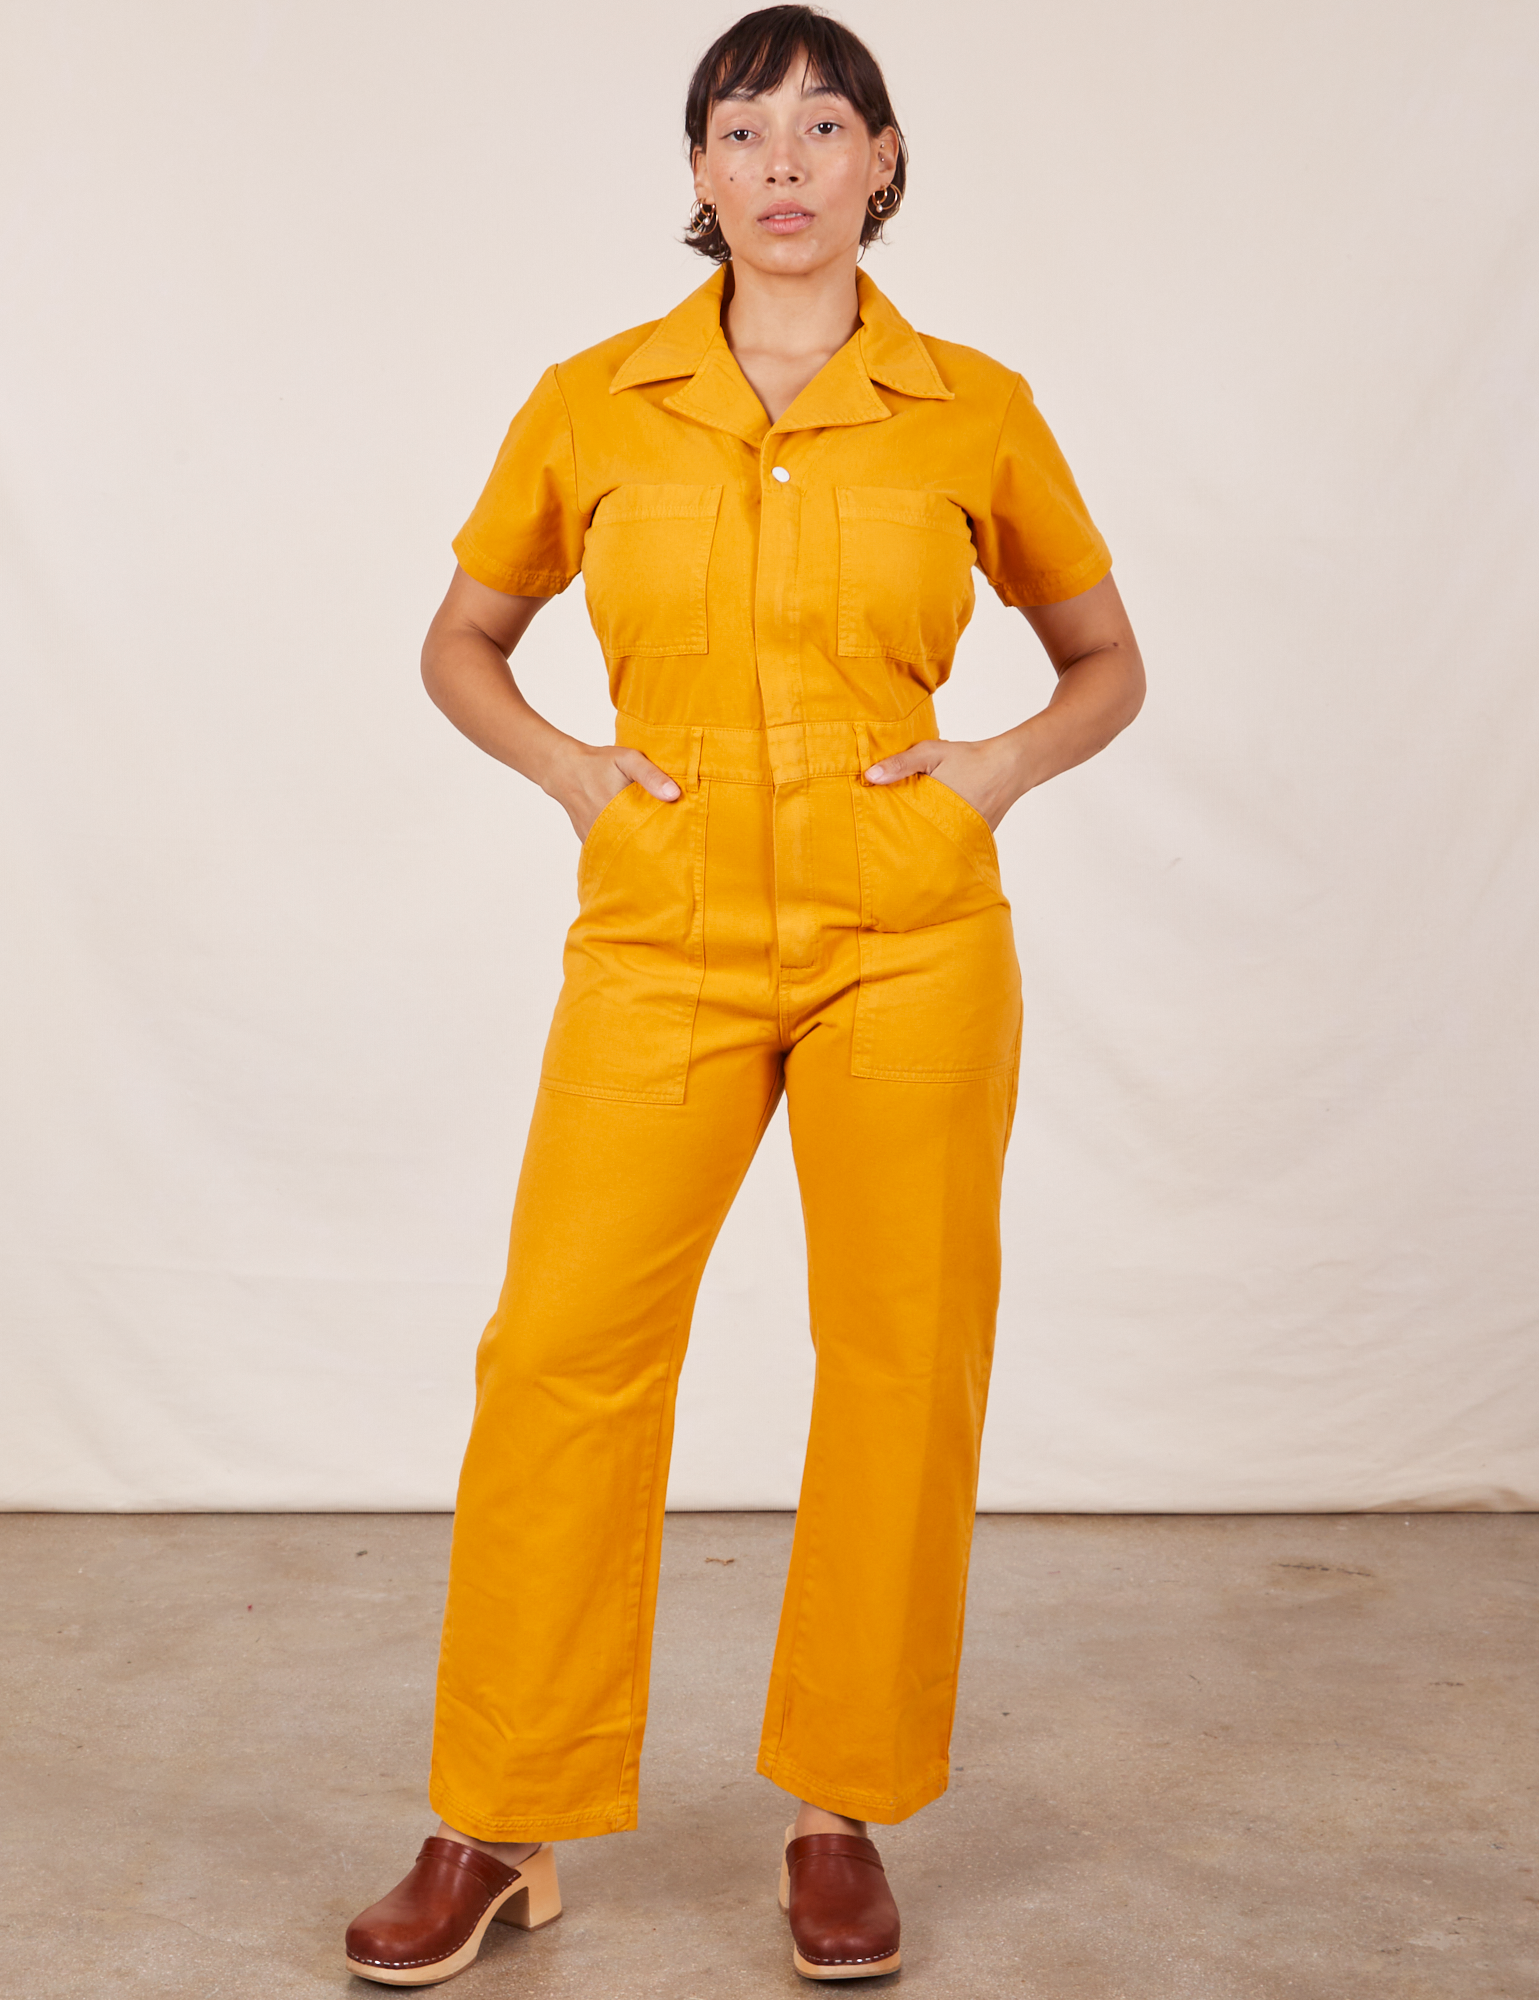 Tiara is 5'4" and wearing S Short Sleeve Jumpsuit in Mustard Yellow